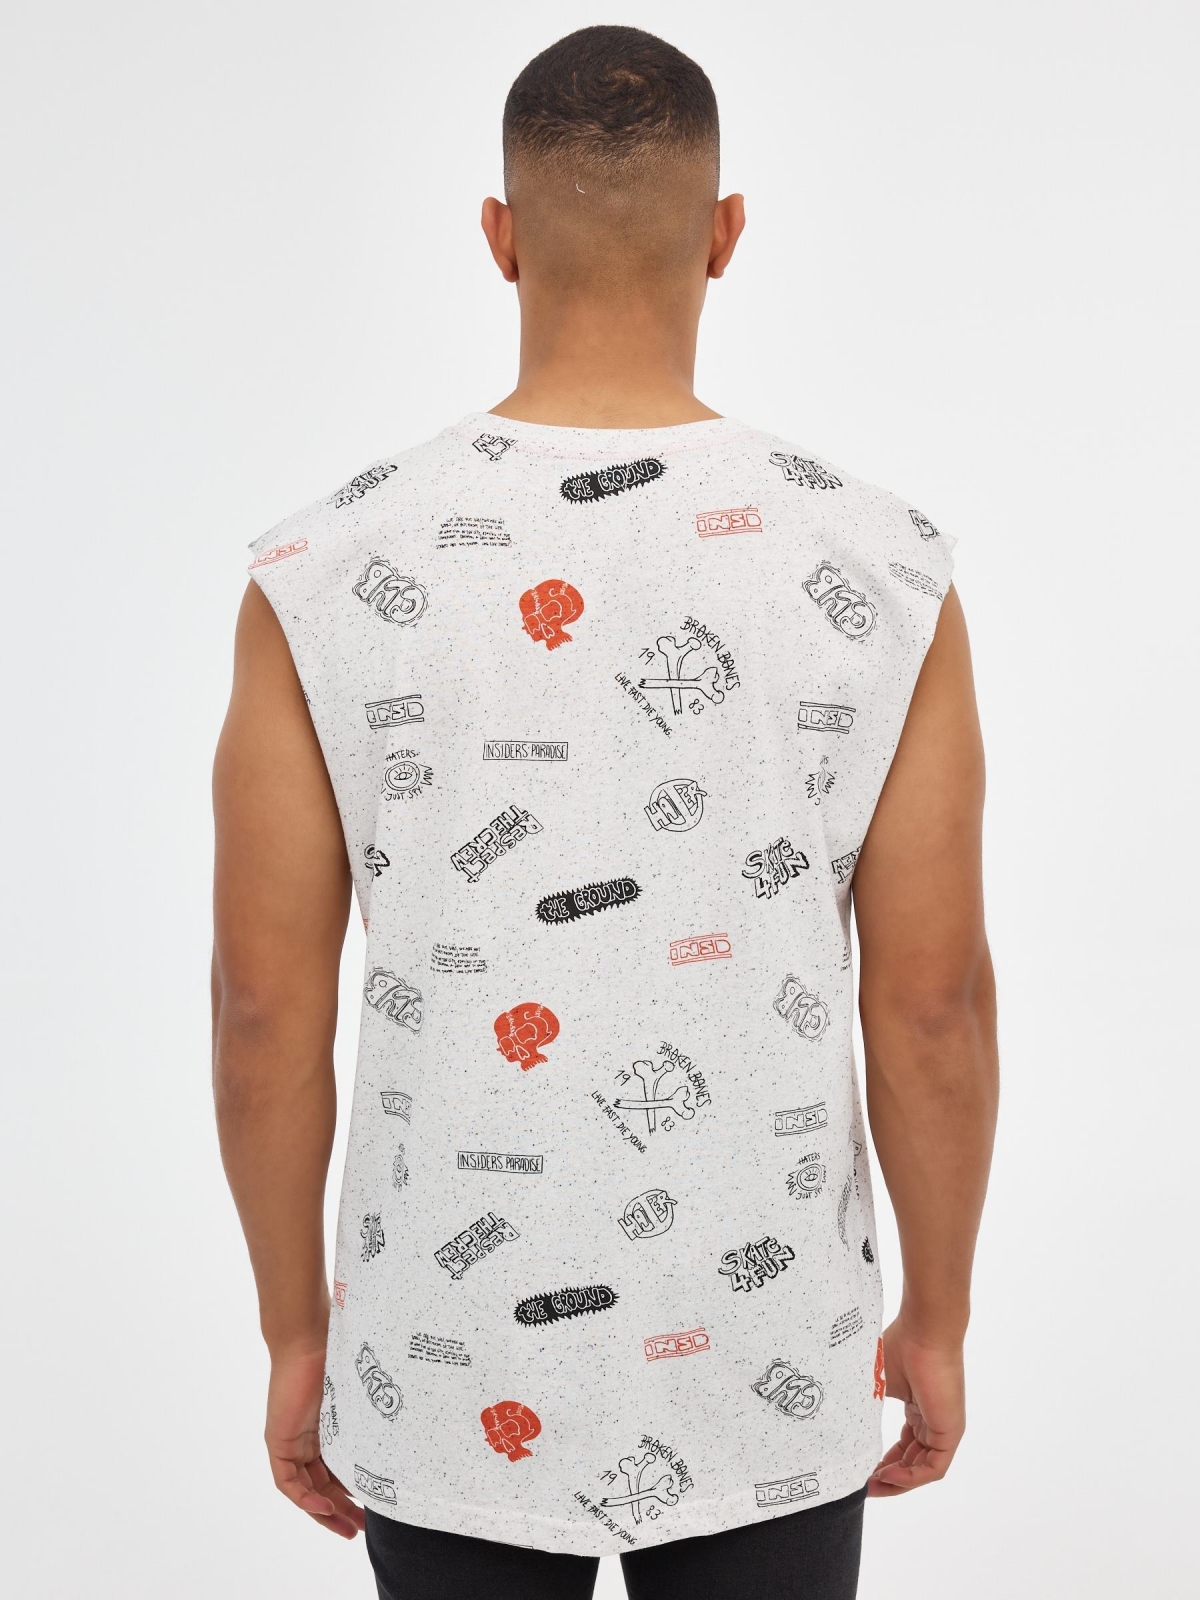 Printed sleeveless t-shirt grey middle back view